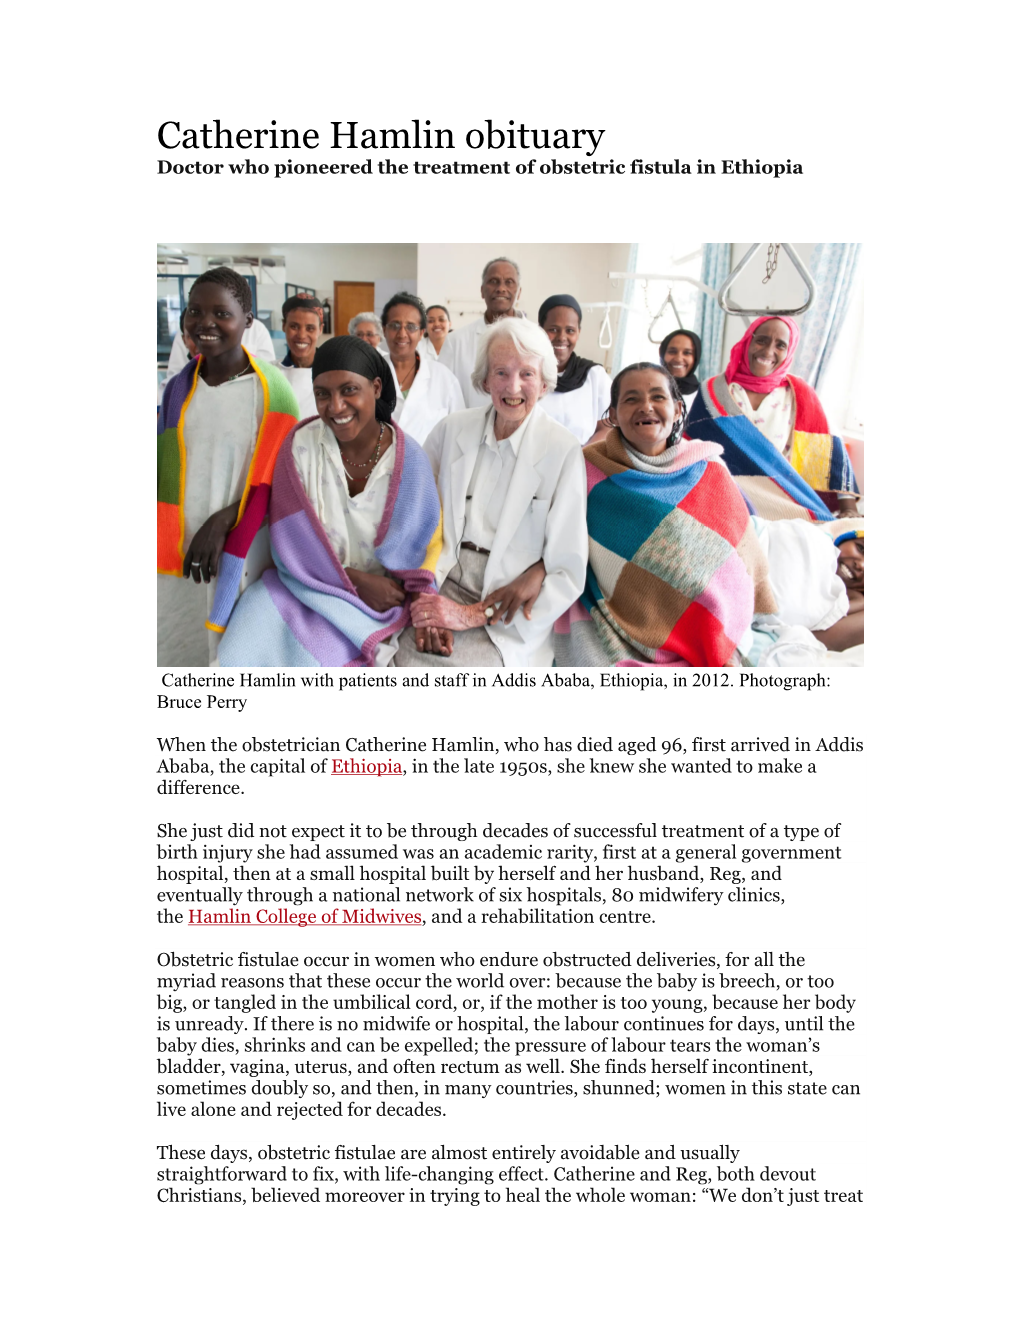 Catherine Hamlin Obituary Doctor Who Pioneered the Treatment of Obstetric Fistula in Ethiopia